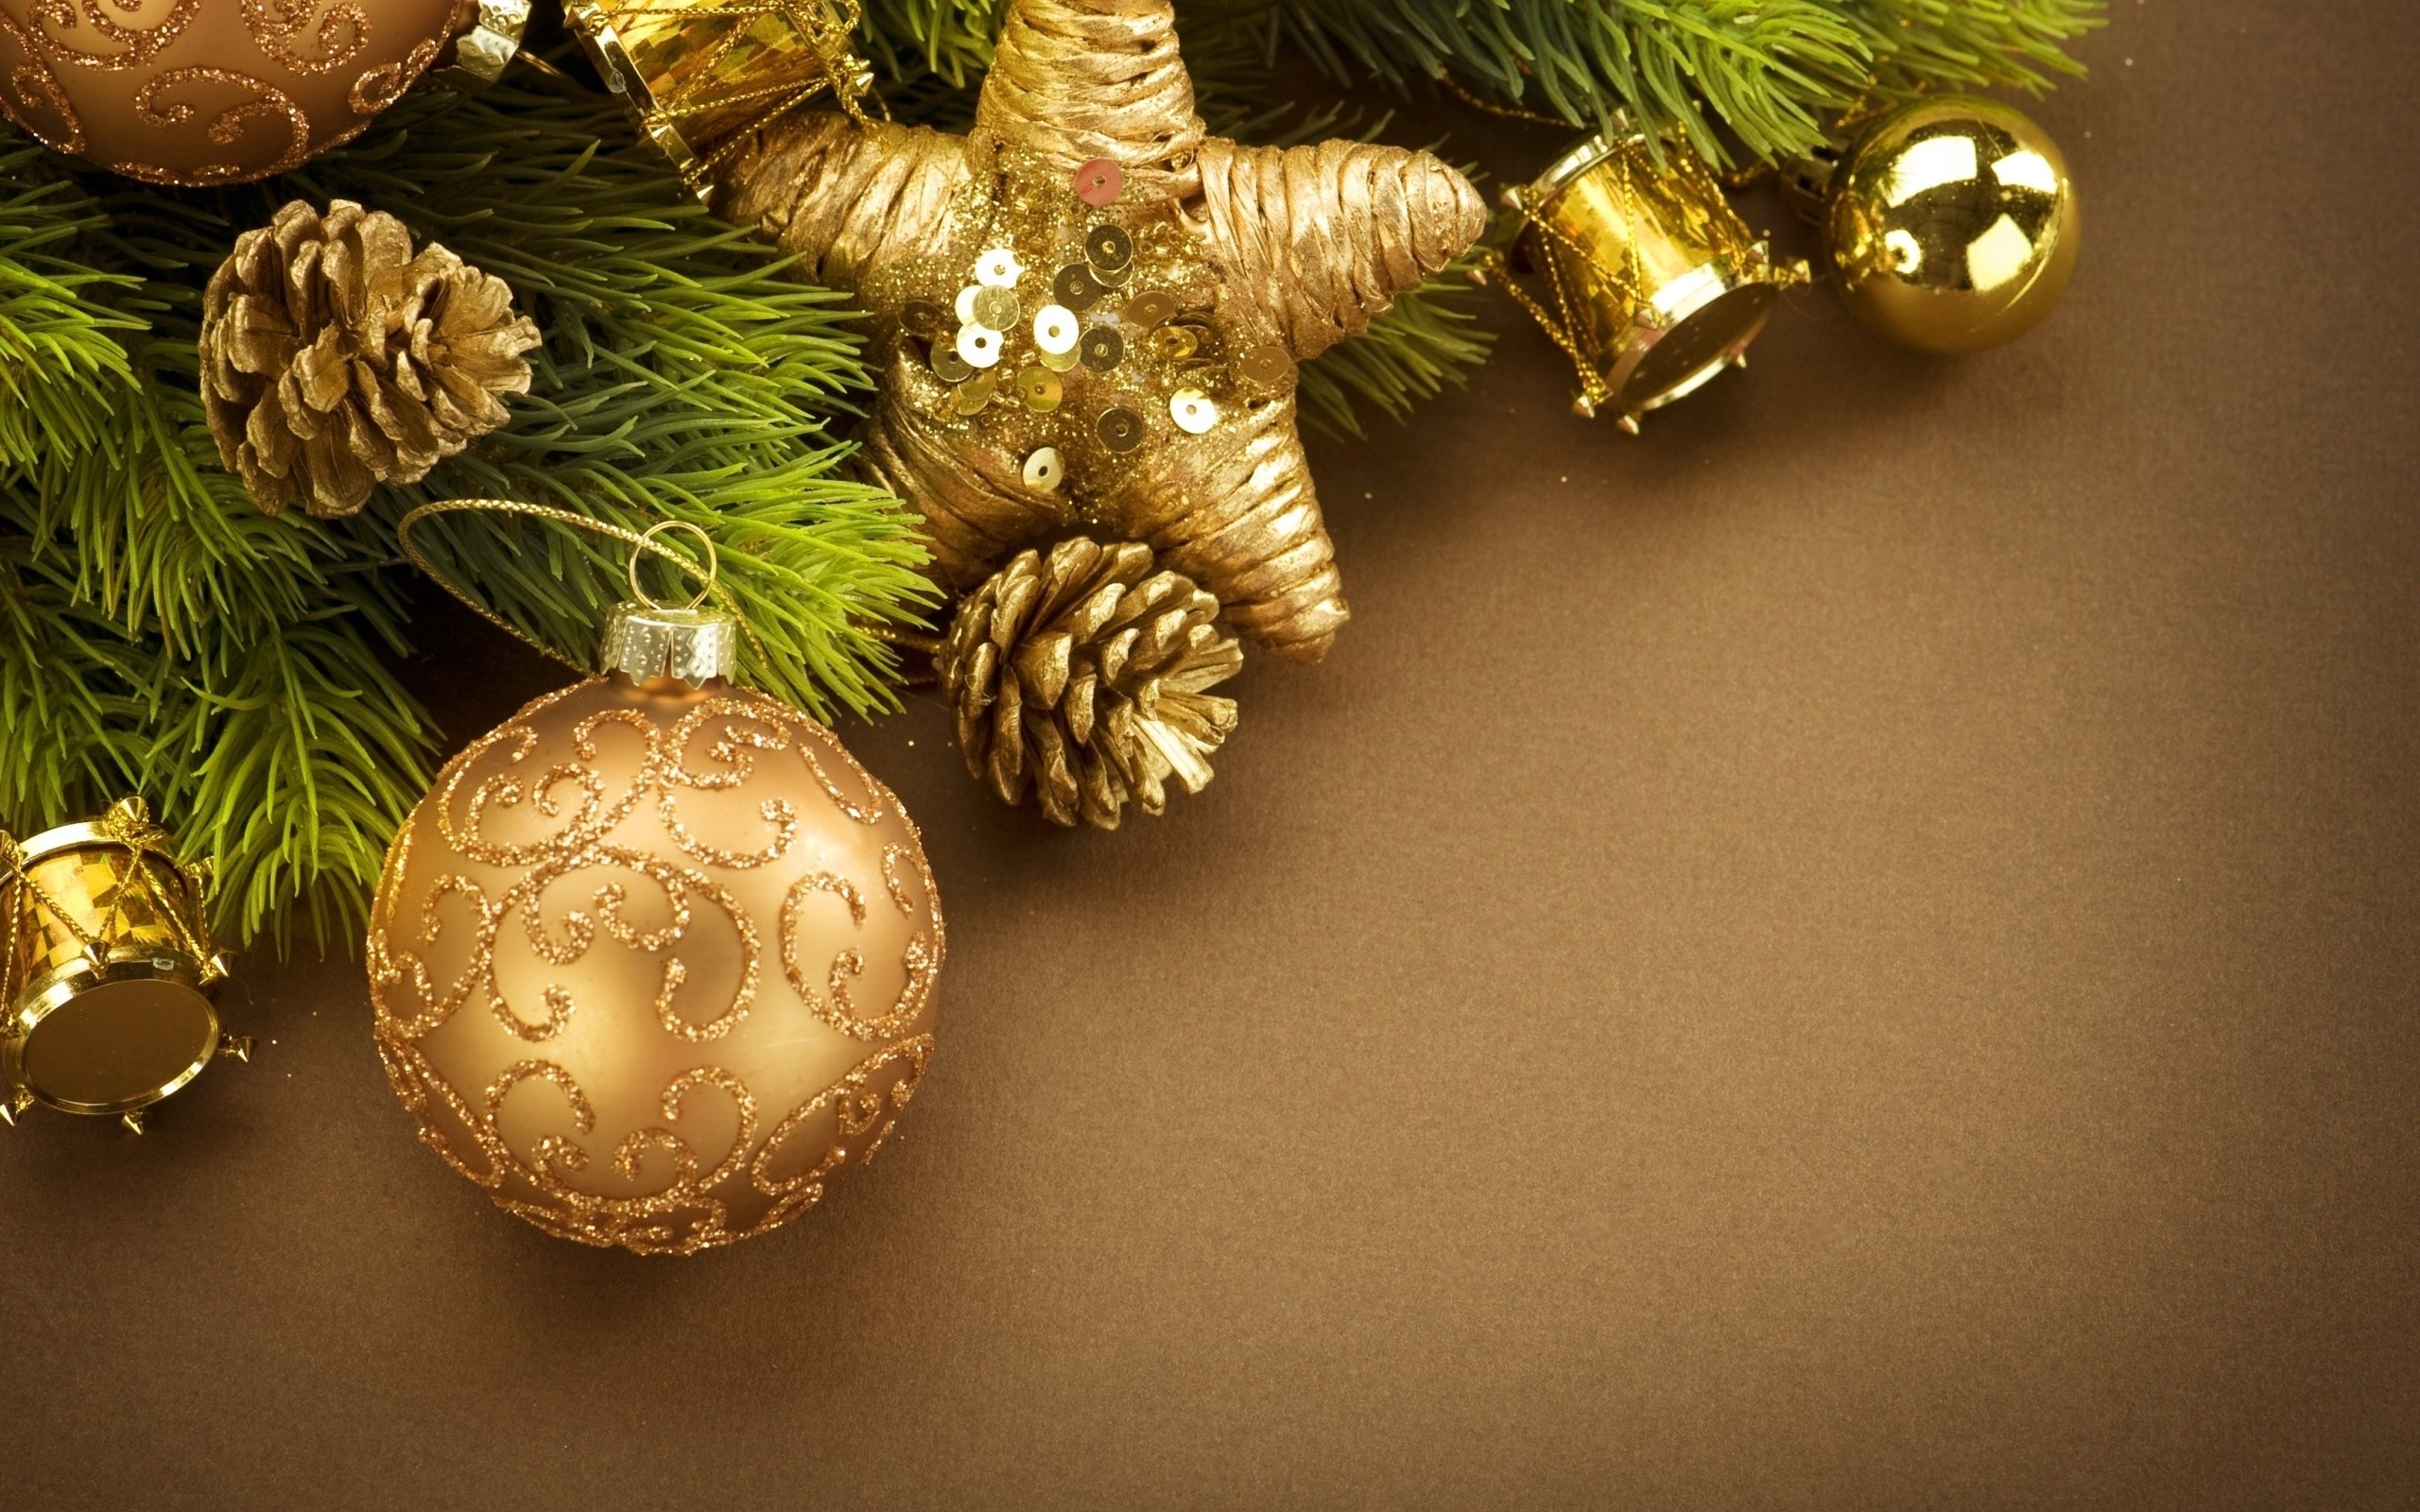 Wallpaper, leaves, Christmas ornaments, New Year, fir, decorations, conifer, cones, tree, decor, 2560x1600 px, christmas decoration, pine family, christmas ornament 2560x1600